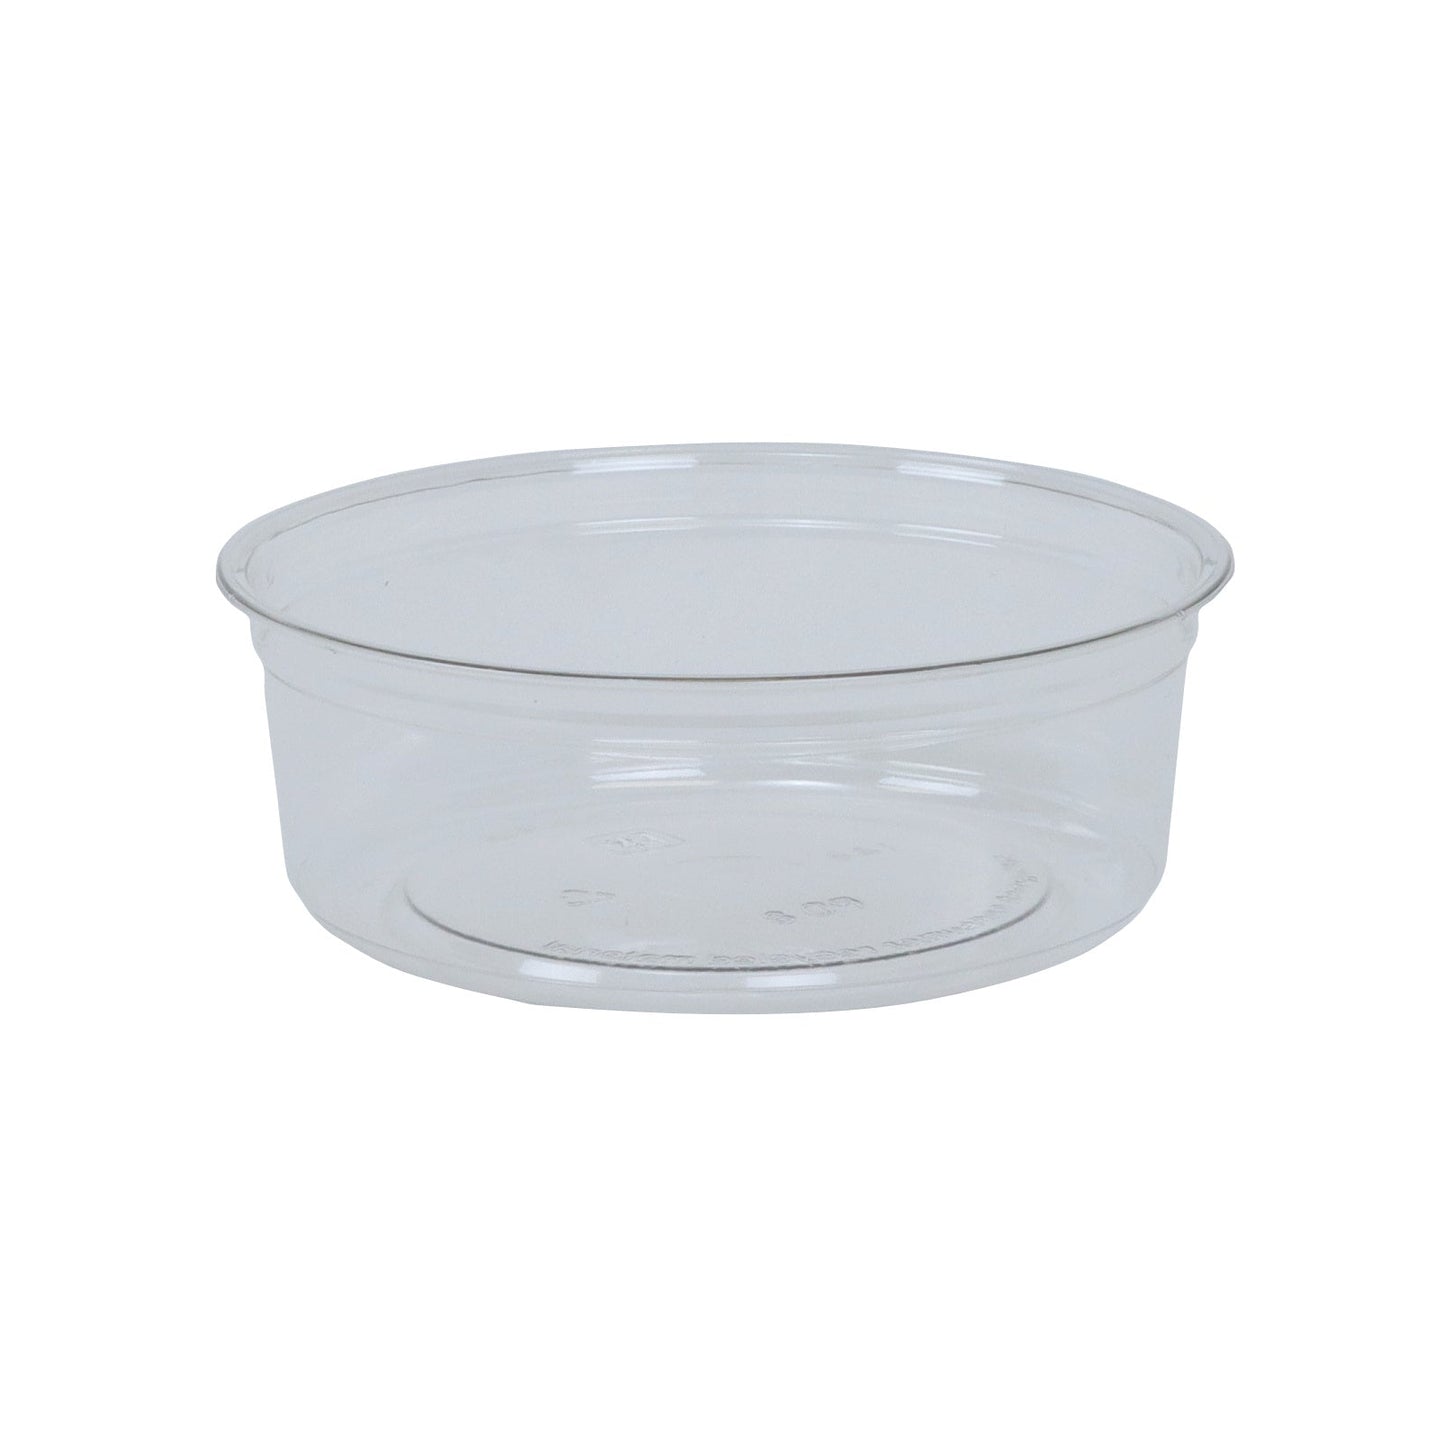 8 oz Deli Container | Recycled Plastic | Made in USA (Pack of 50)